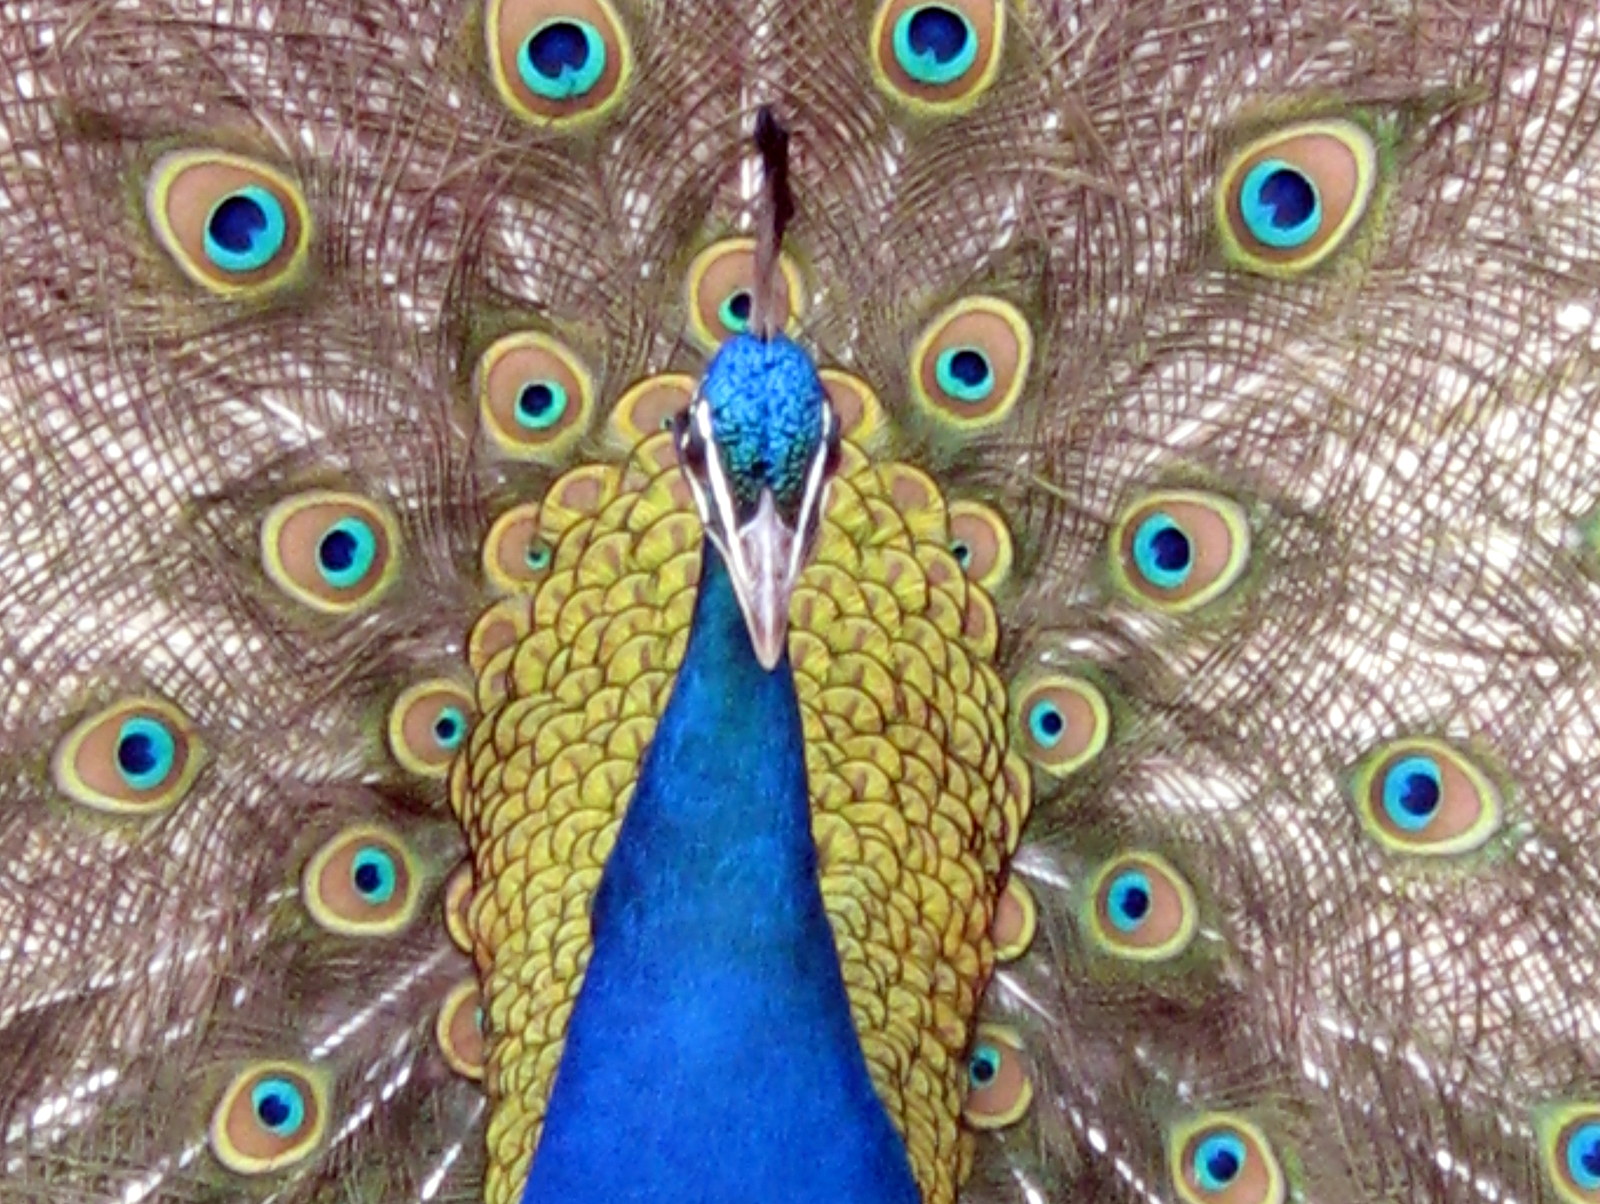 Un des paons / One of the peacocks